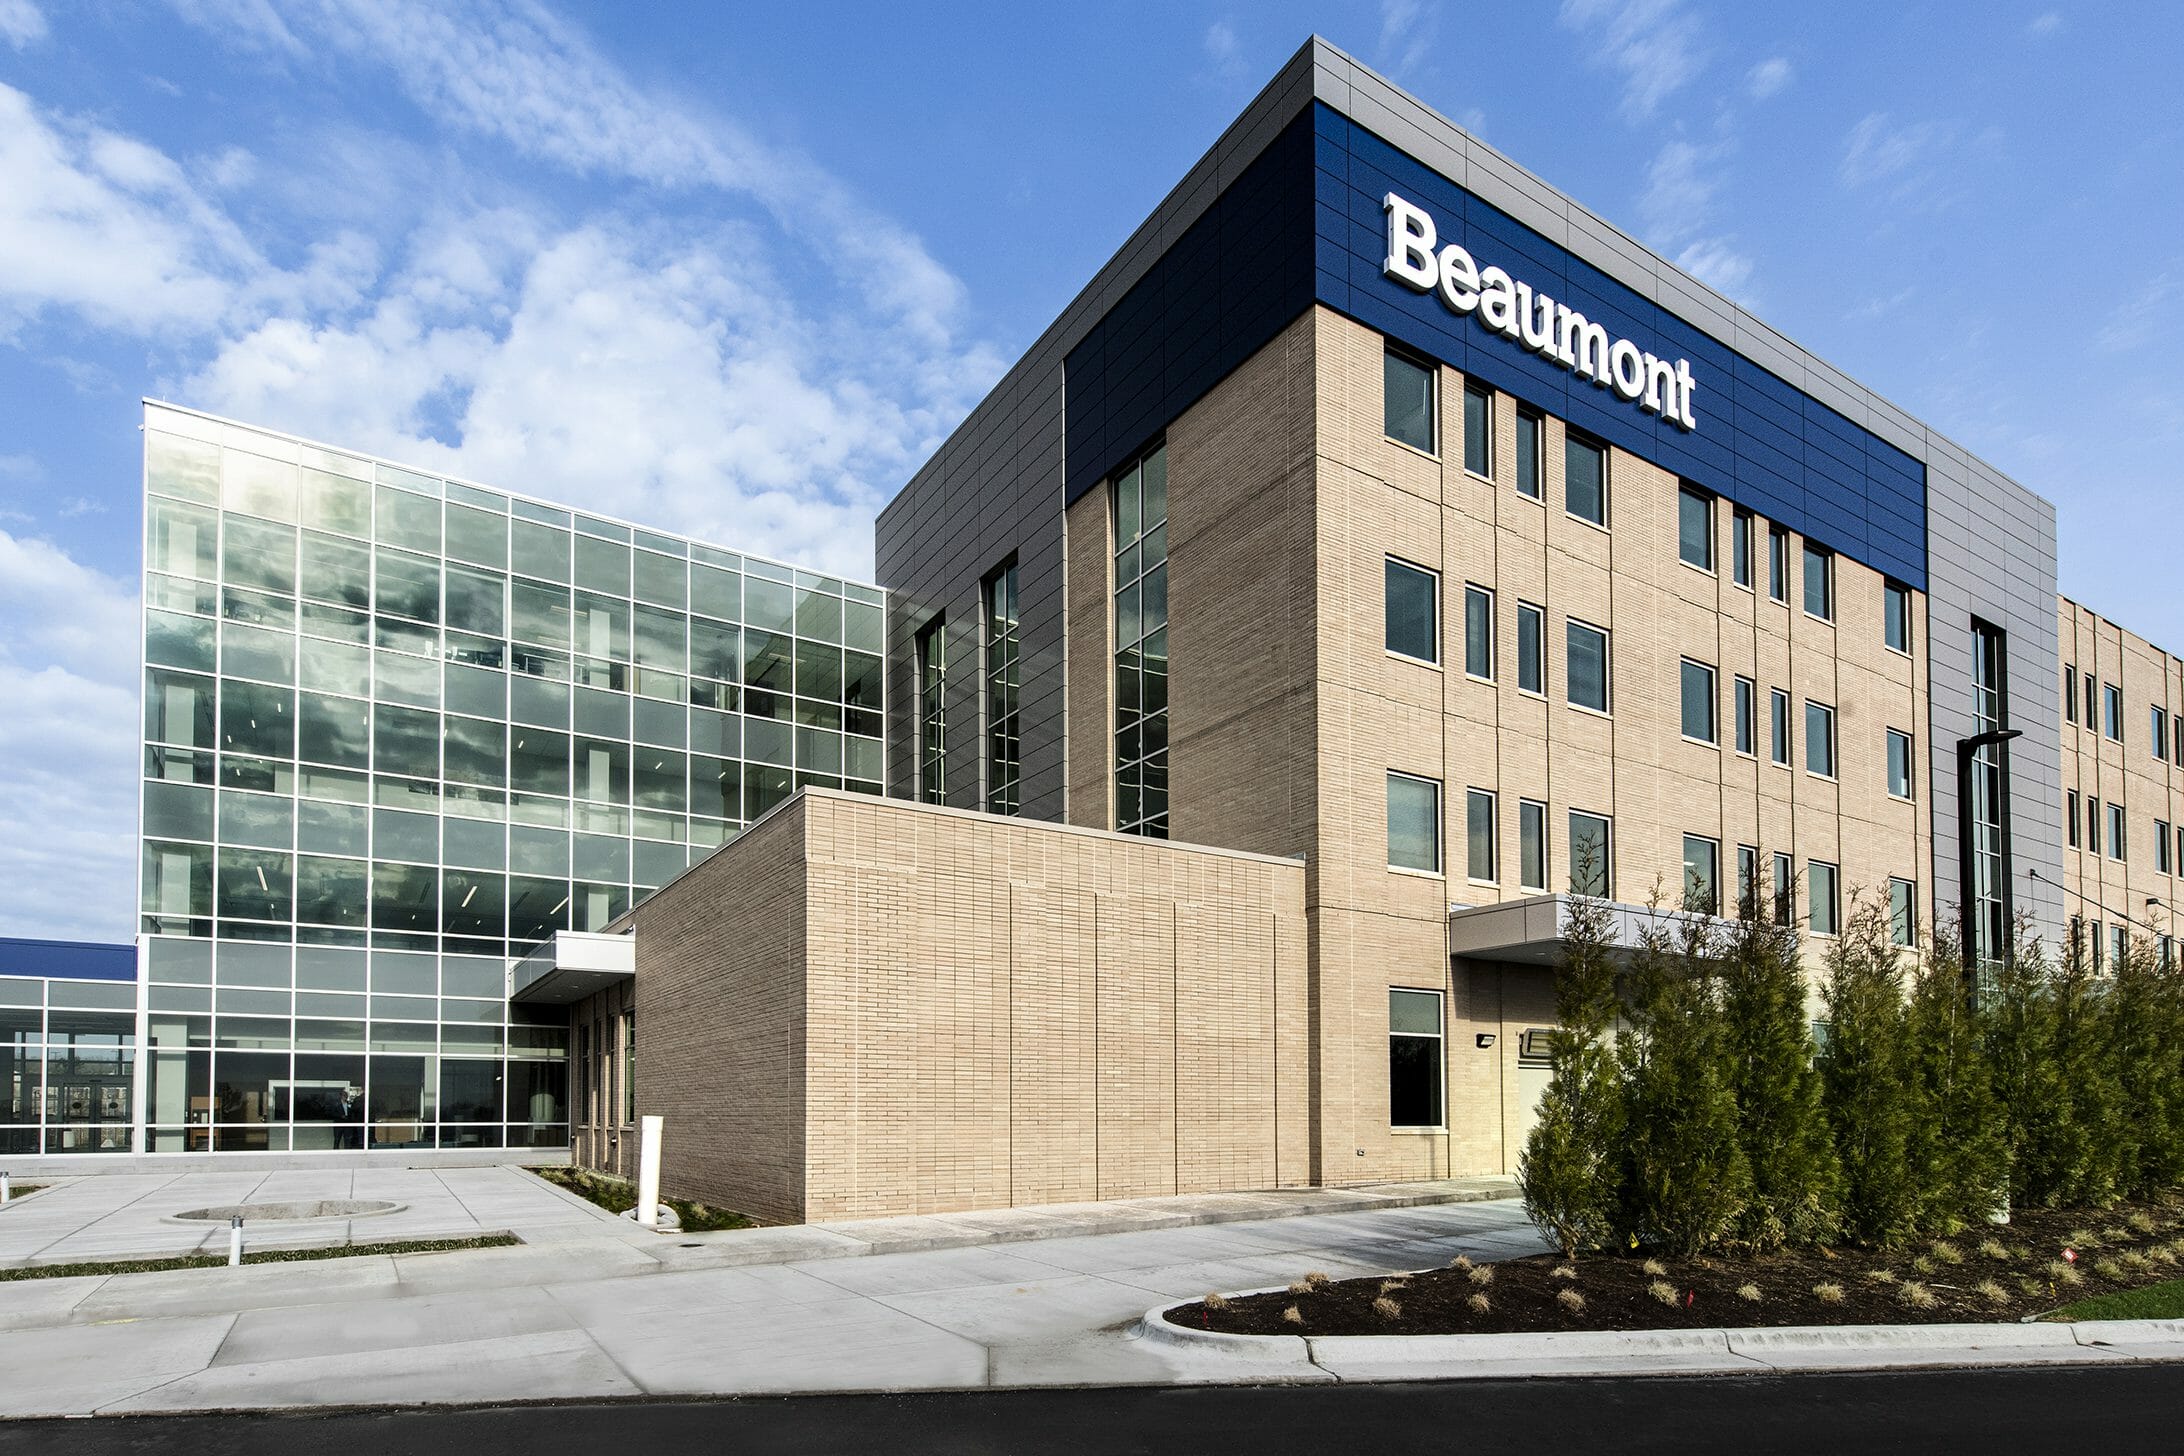 Exterior view of Beaumont medical center with a tan brick, gray, blue, and glass exterior finishes with walking path lined by trees in front of building